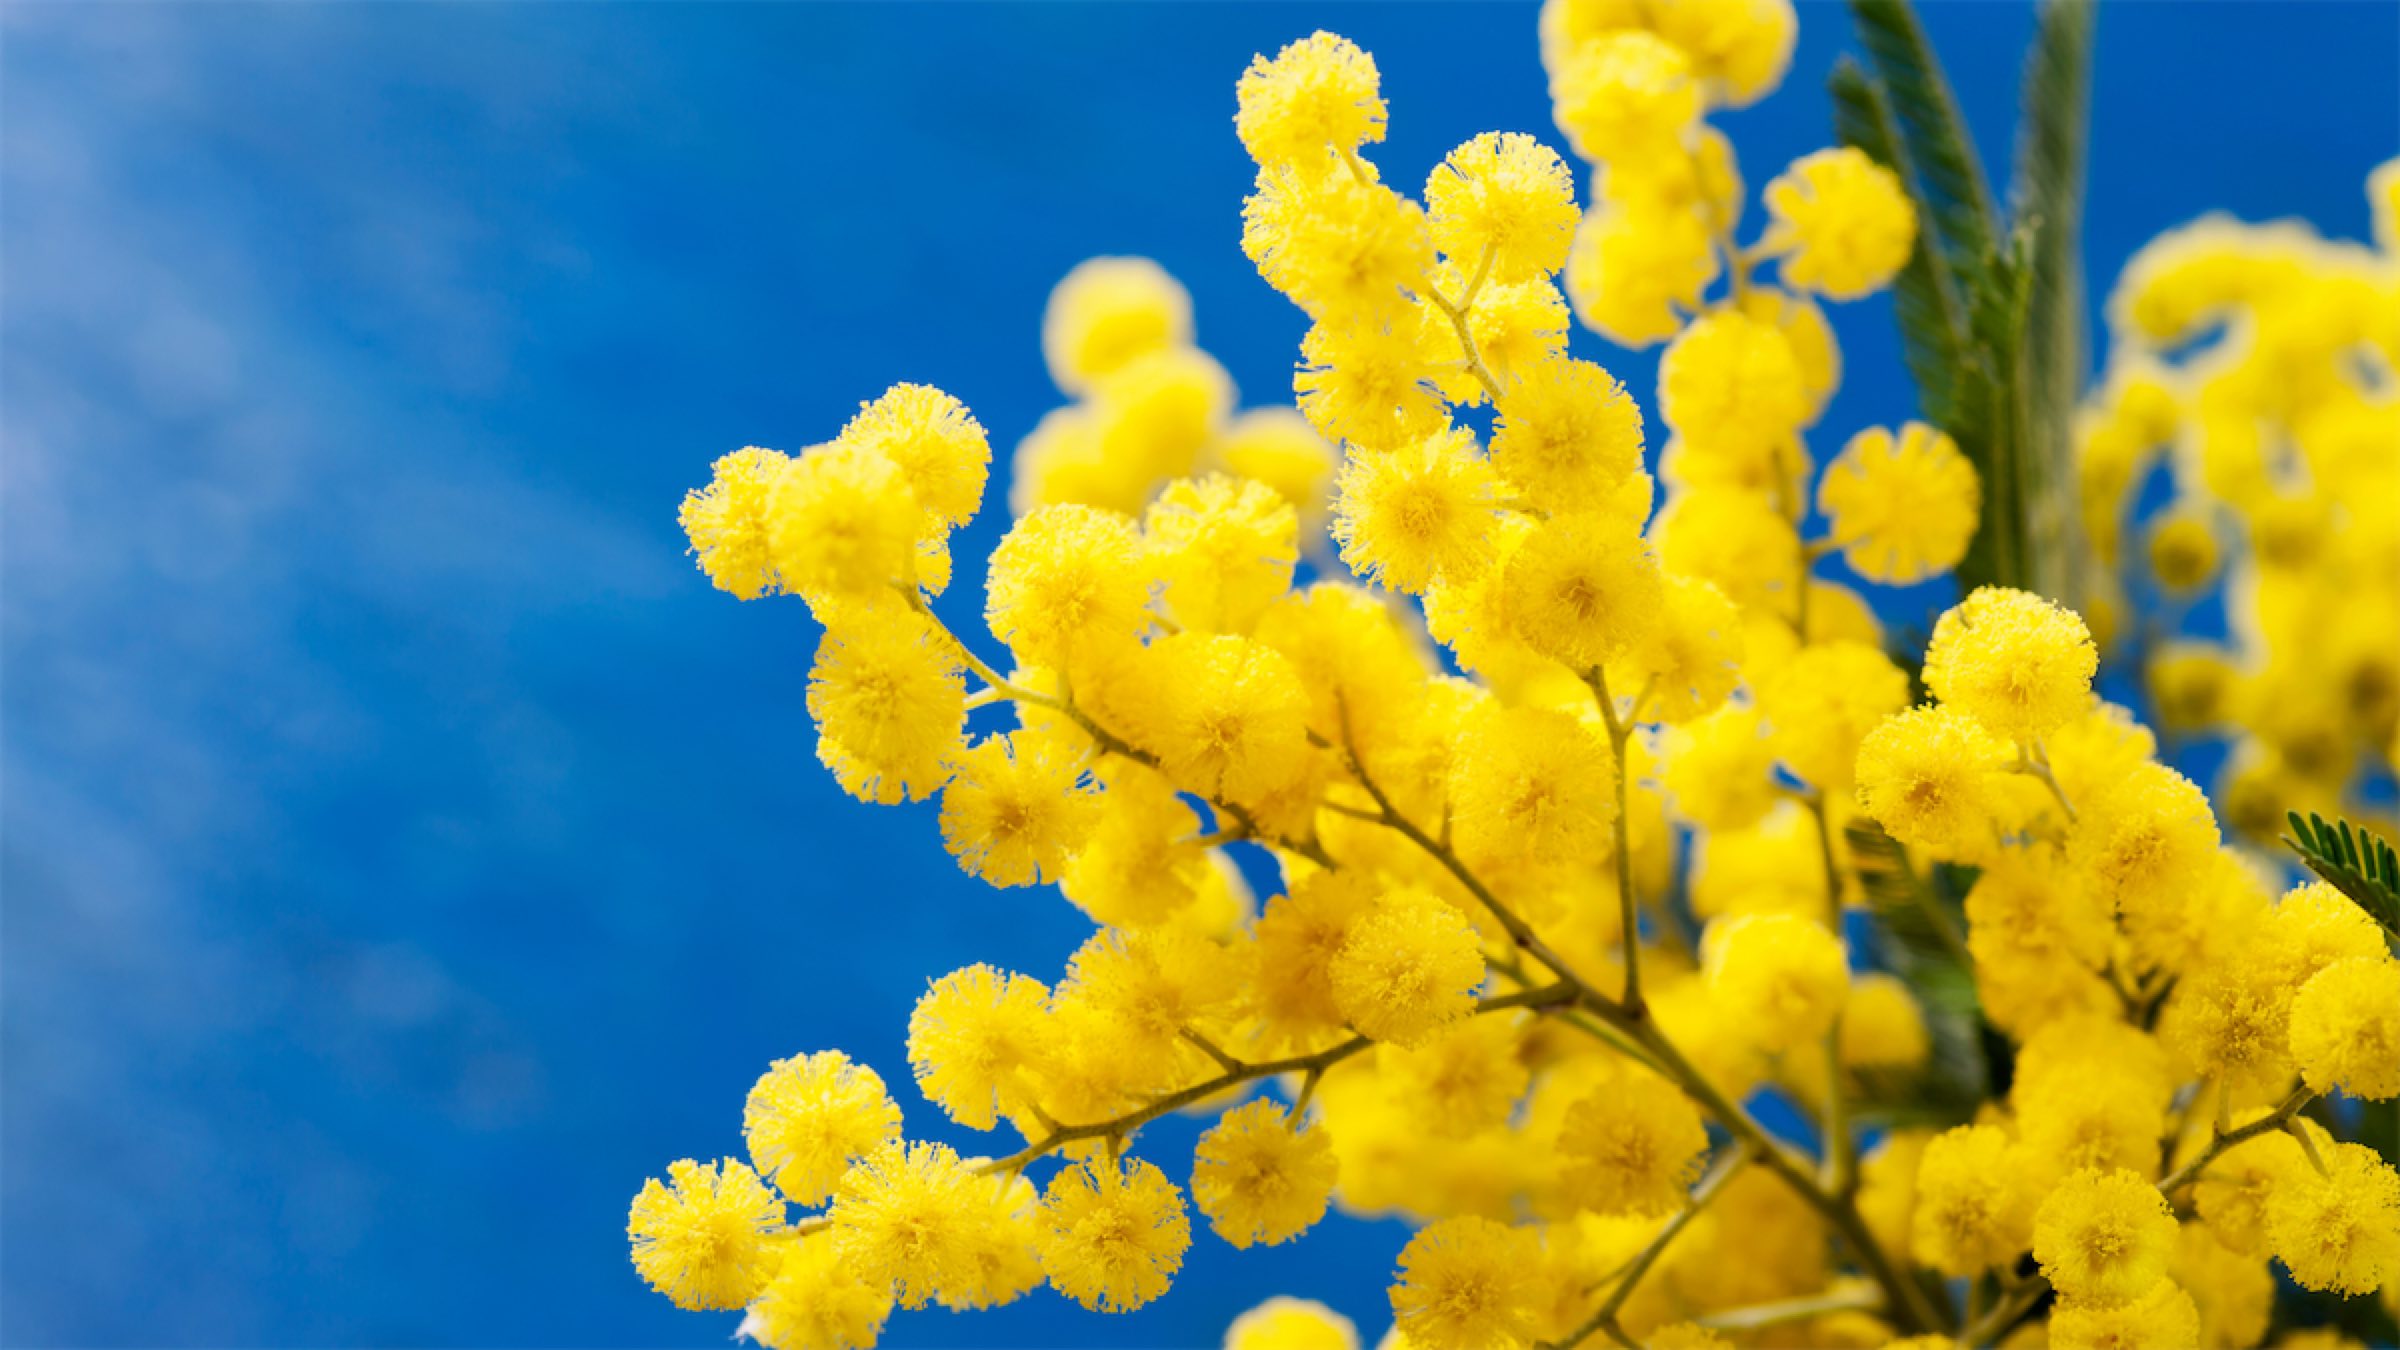 images/mimose.jpg